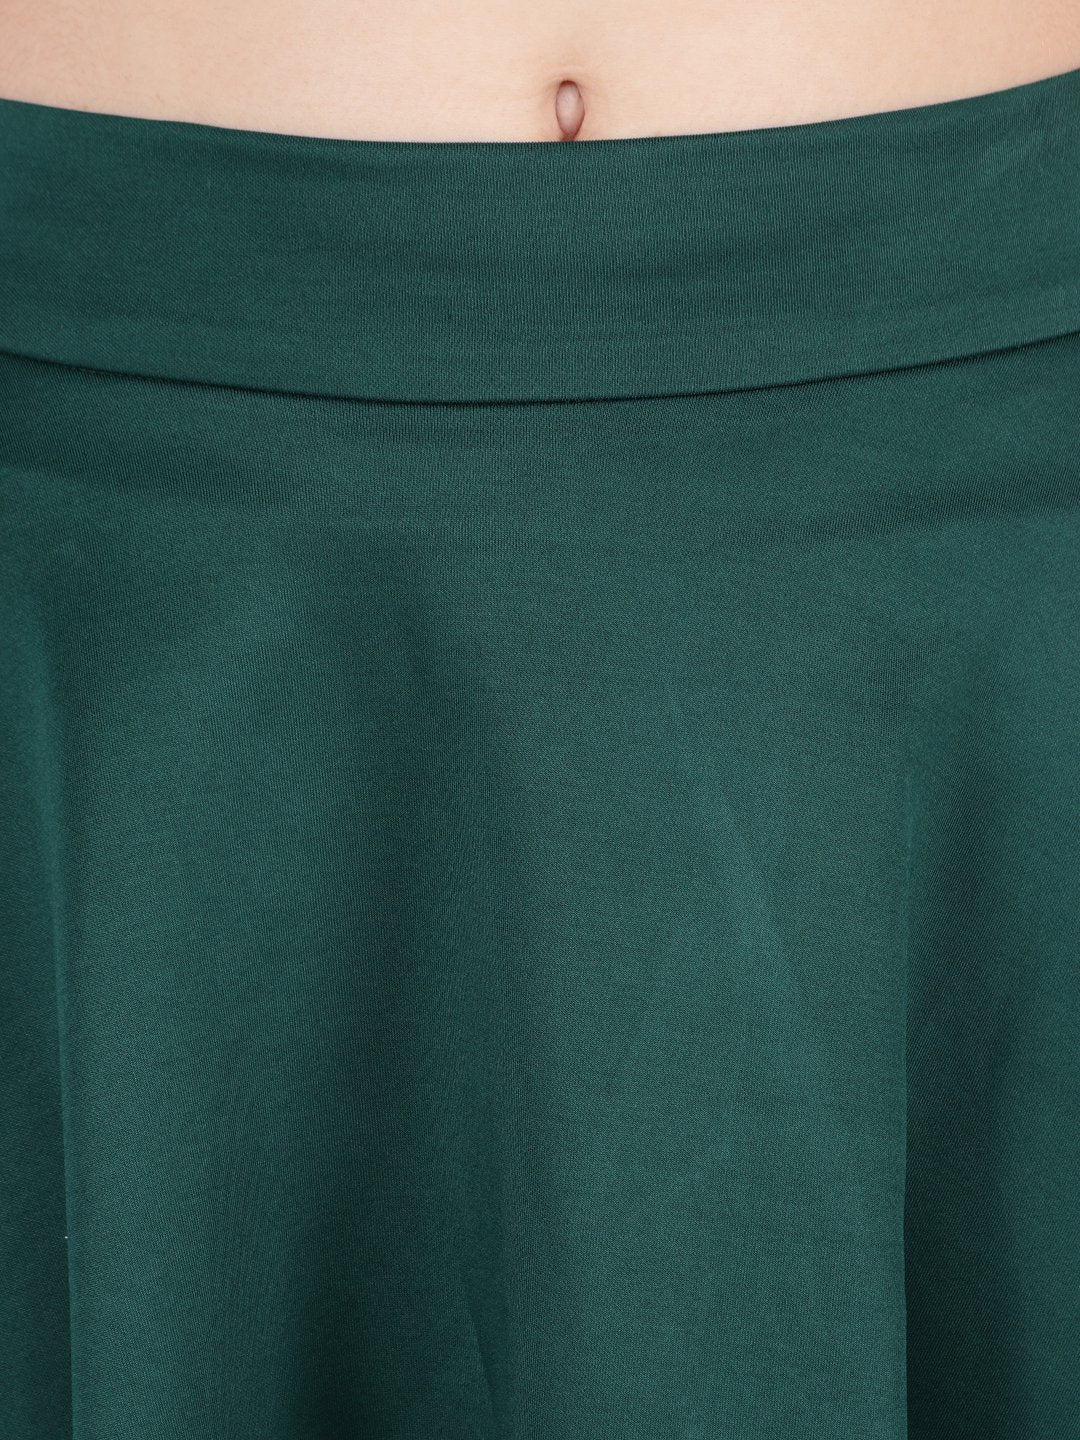 Green Solid Skirt